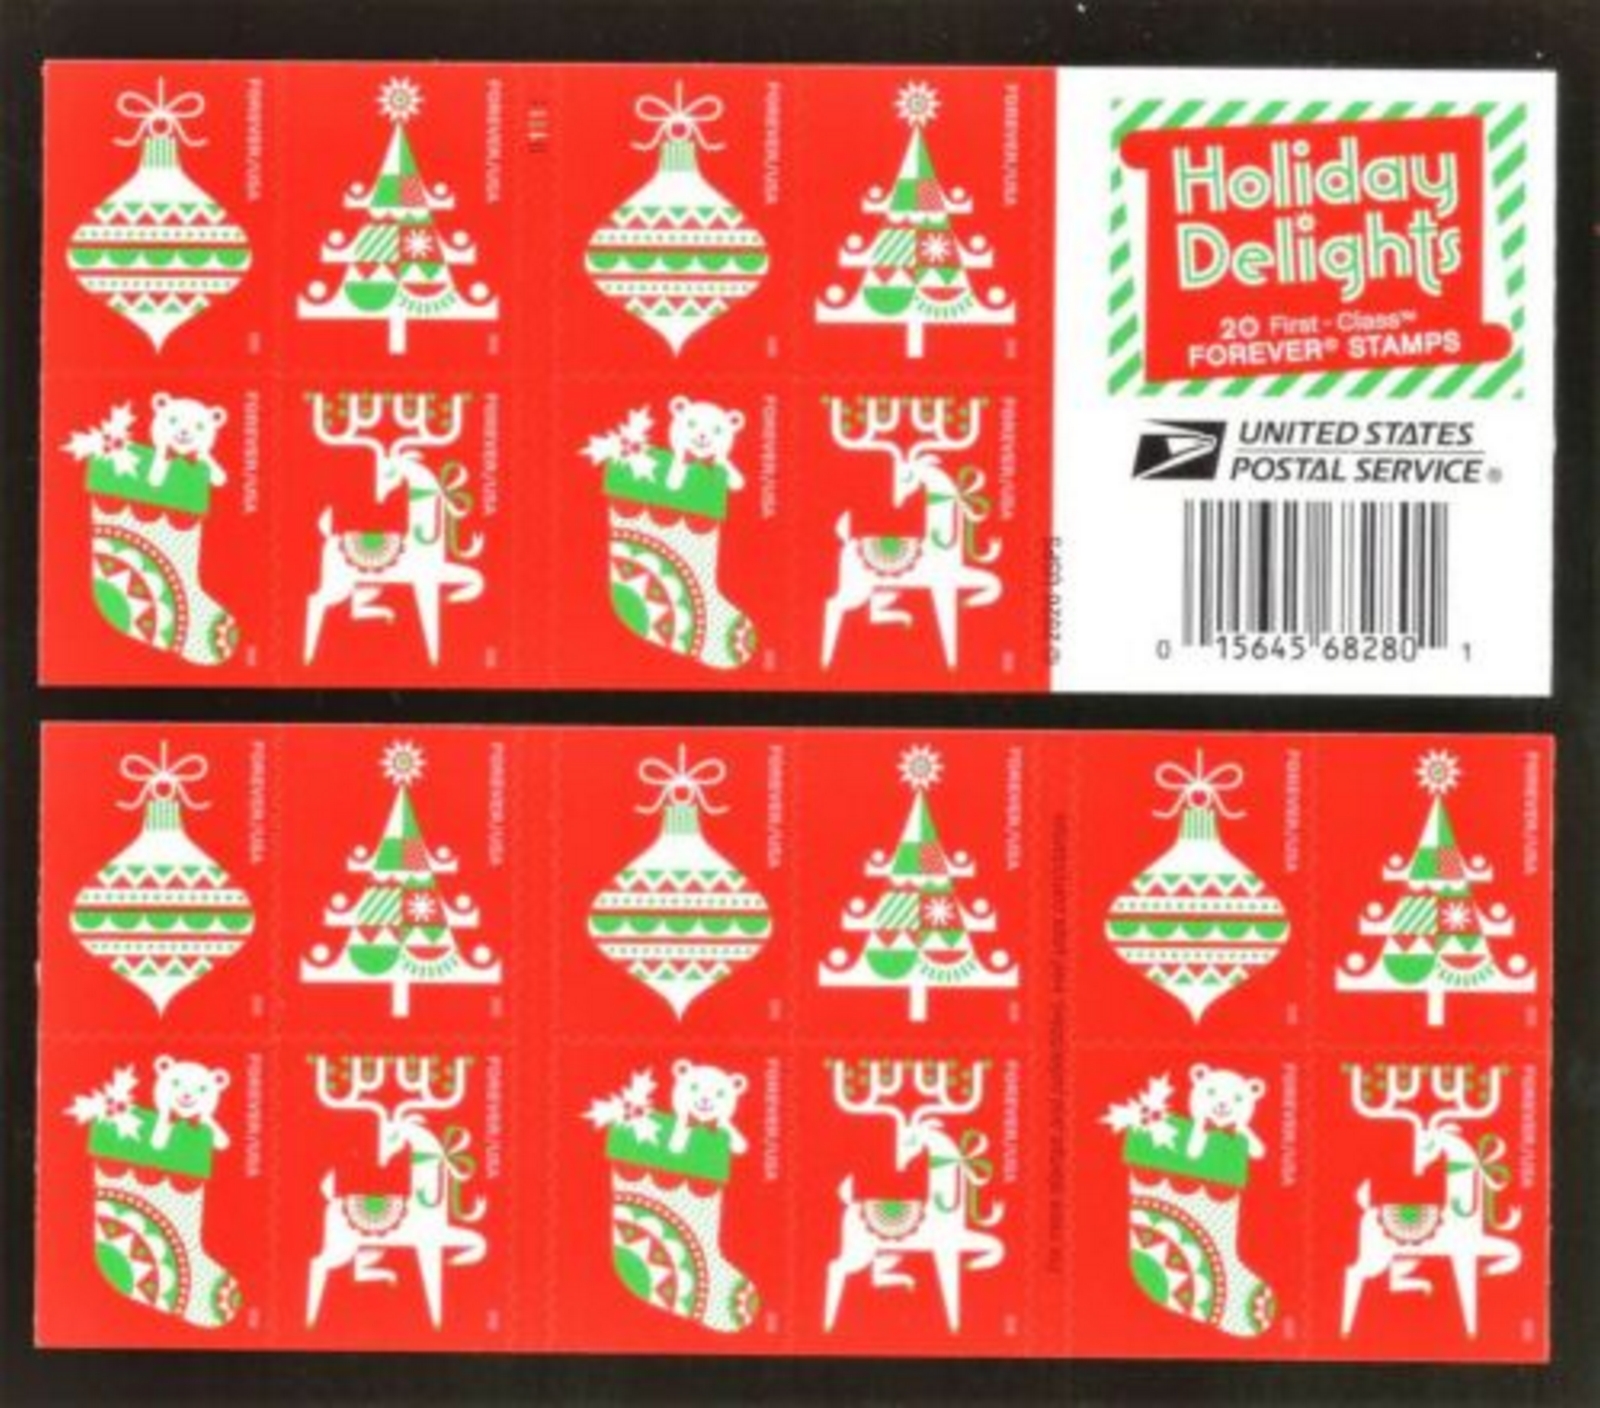 5529a Forever Holiday Delights Mint Booklet of 20 #5529a